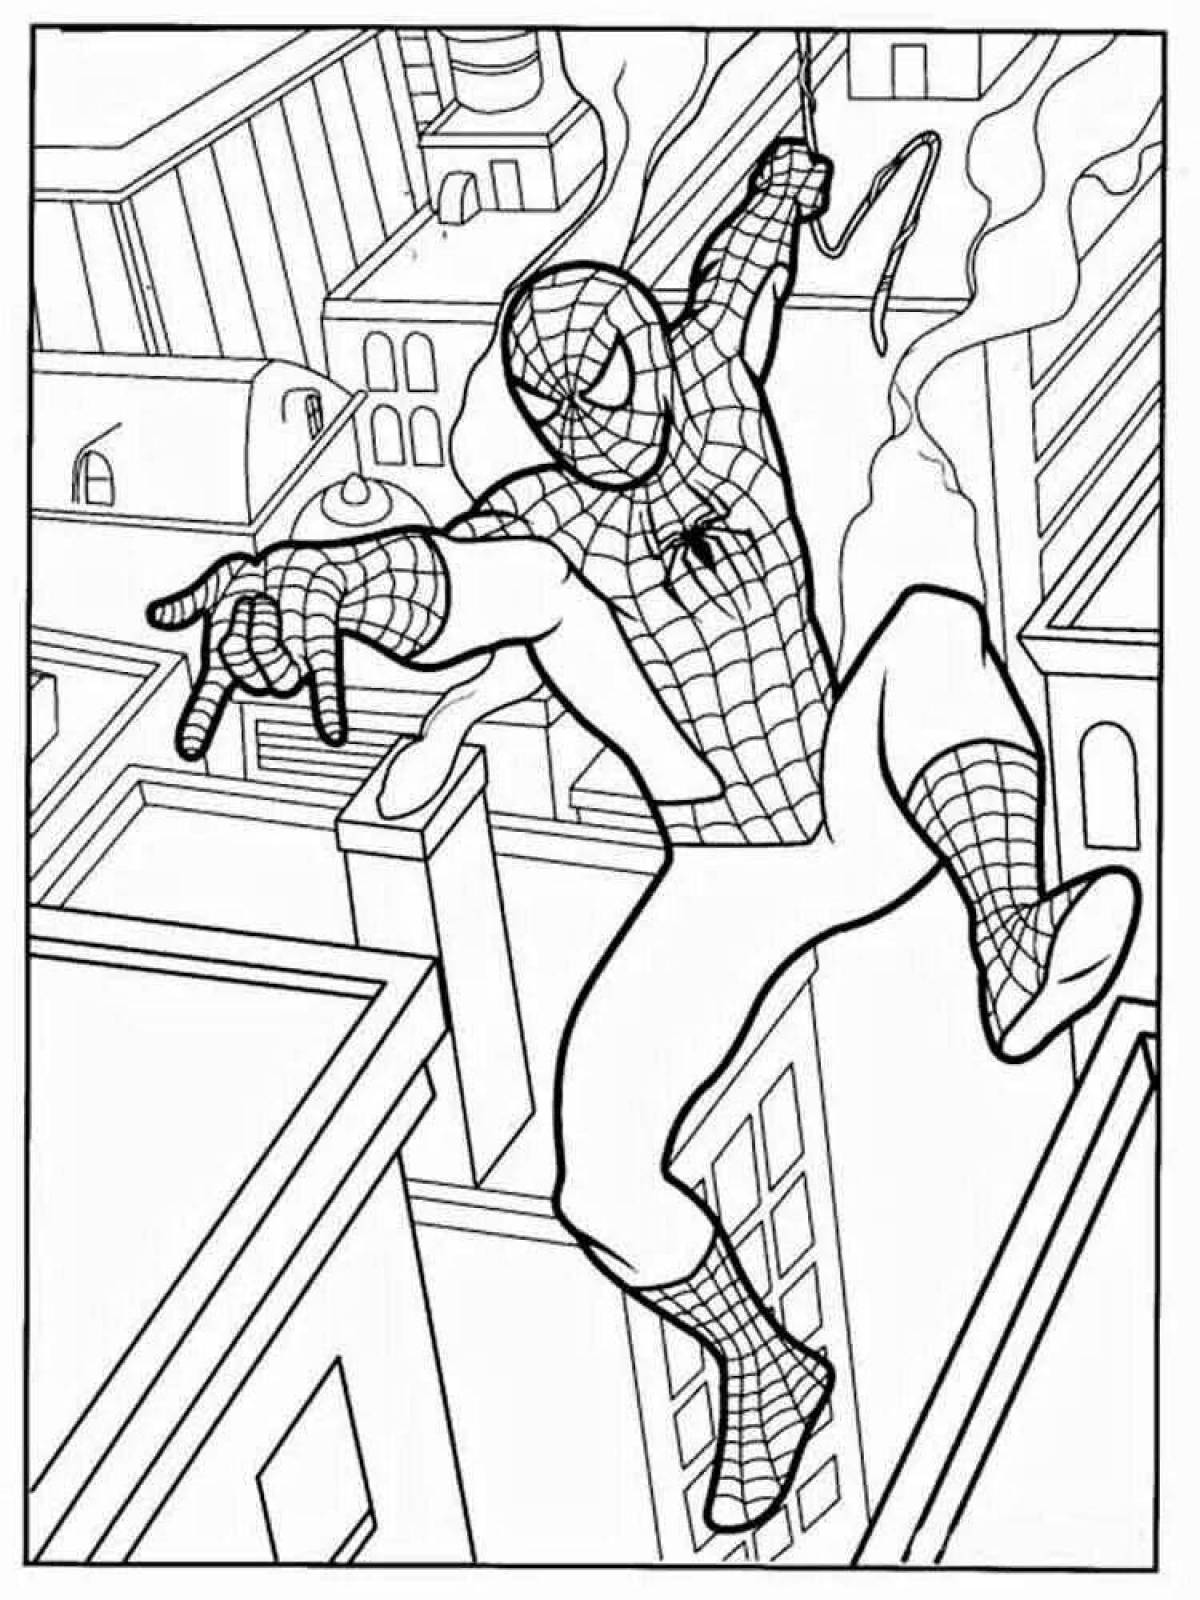 Colorful spiderman turn on coloring